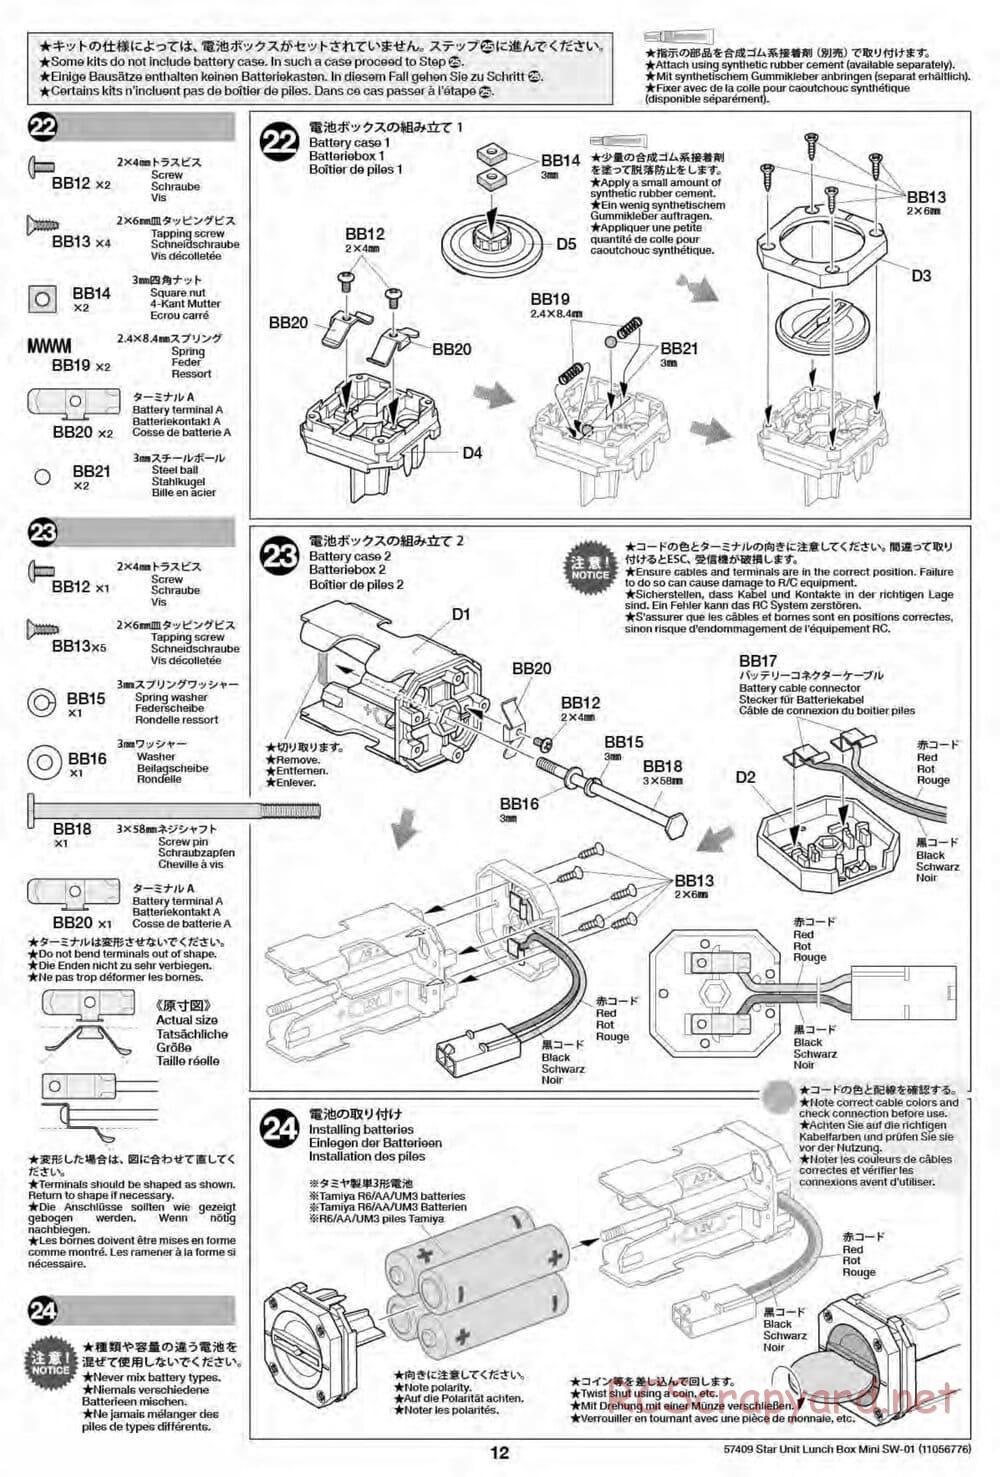 Tamiya - Lunch Box Mini - SW-01 Chassis - Manual - Page 12